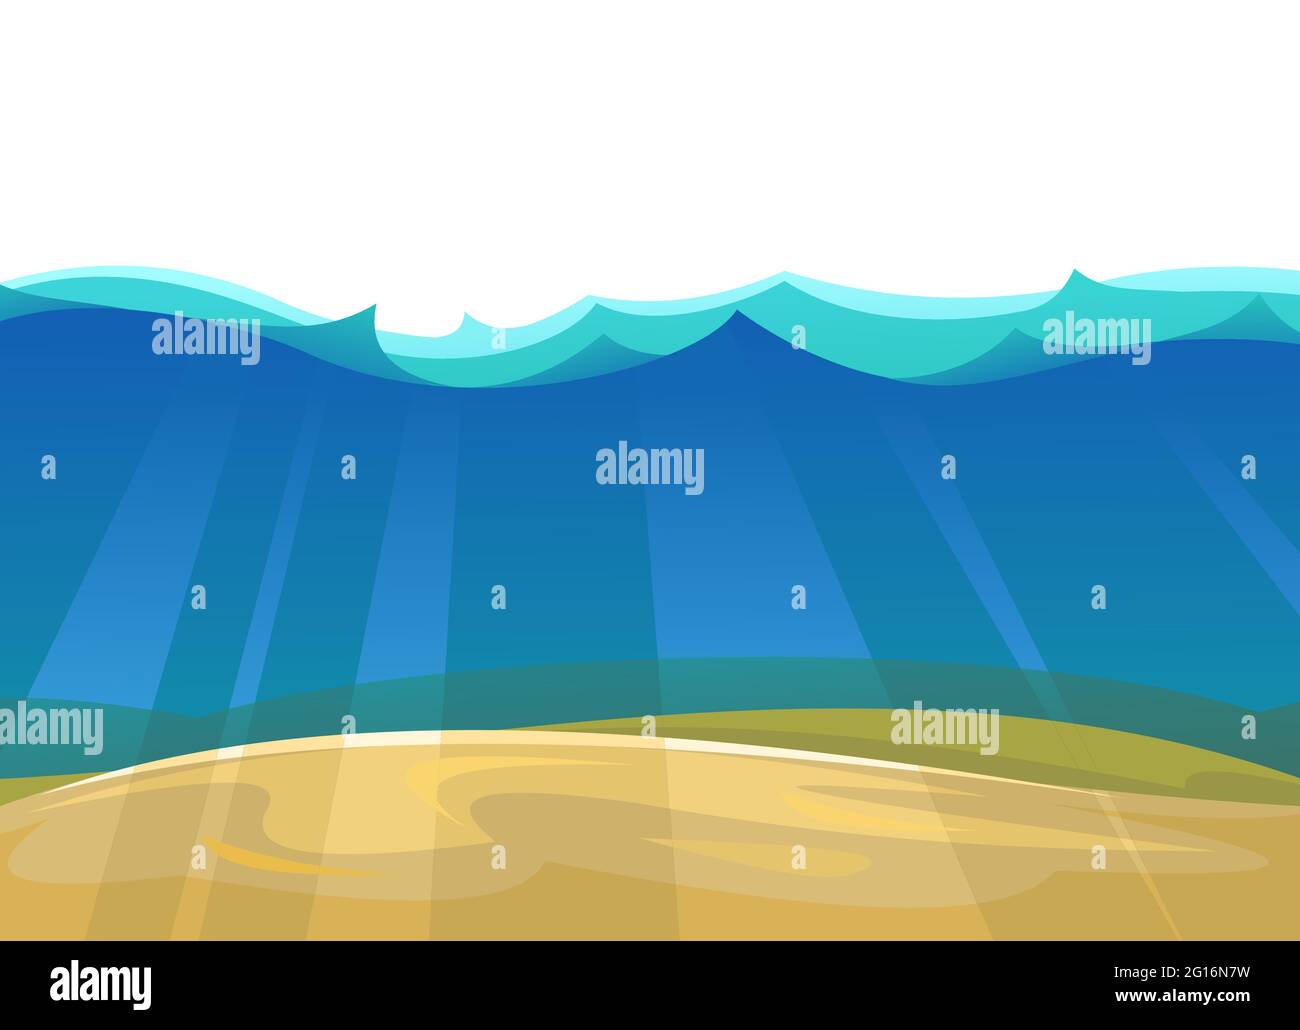 Sandy bottom of the reservoir. Blue transparent clear water. Sea ocean. Underwater landscape. Isolated. Illustration in cartoon style. Flat design Stock Vector